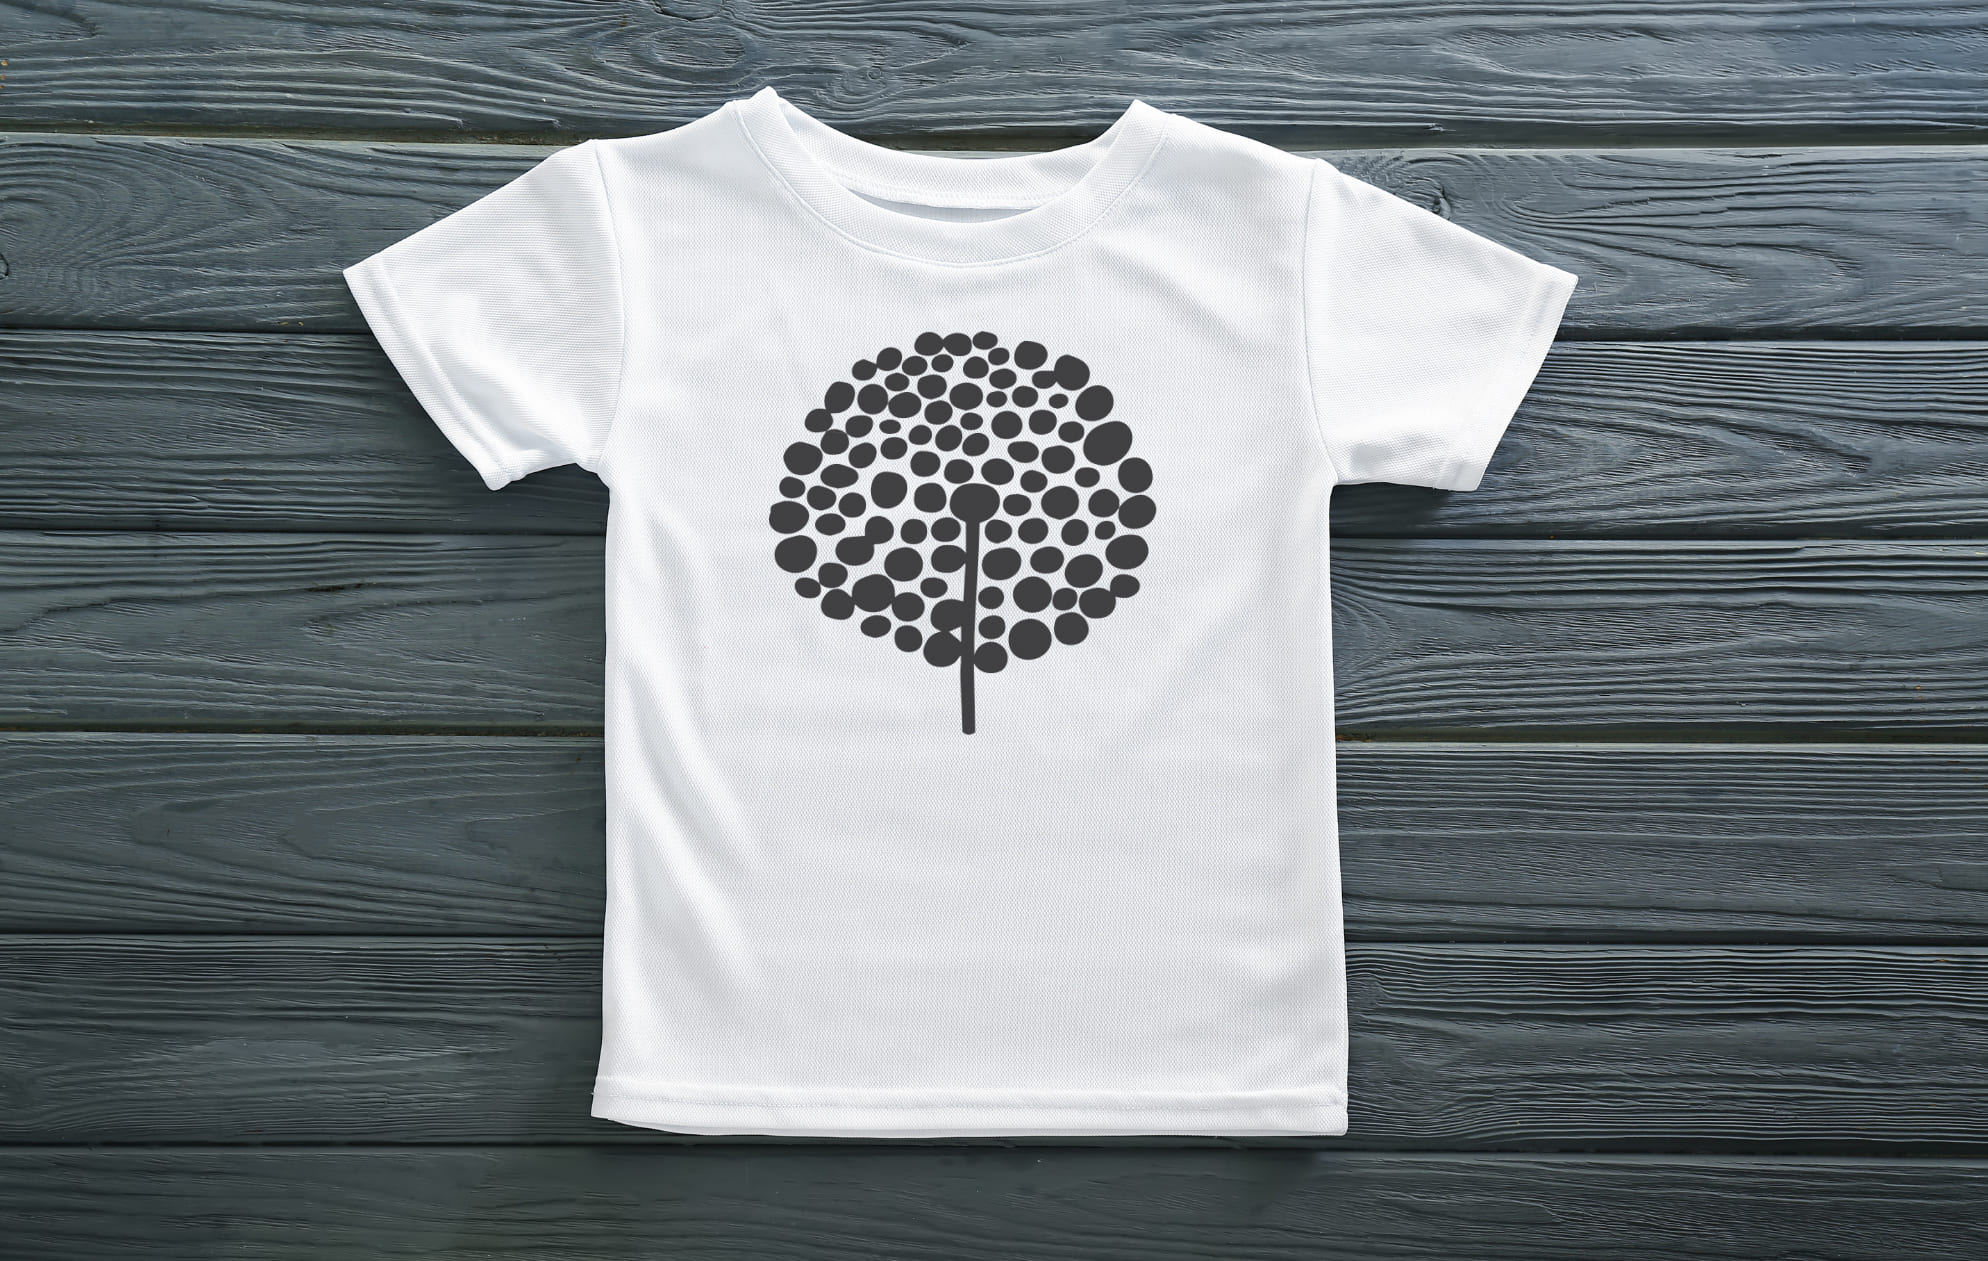 White t-shirt with a black silhouette of a dandelion.